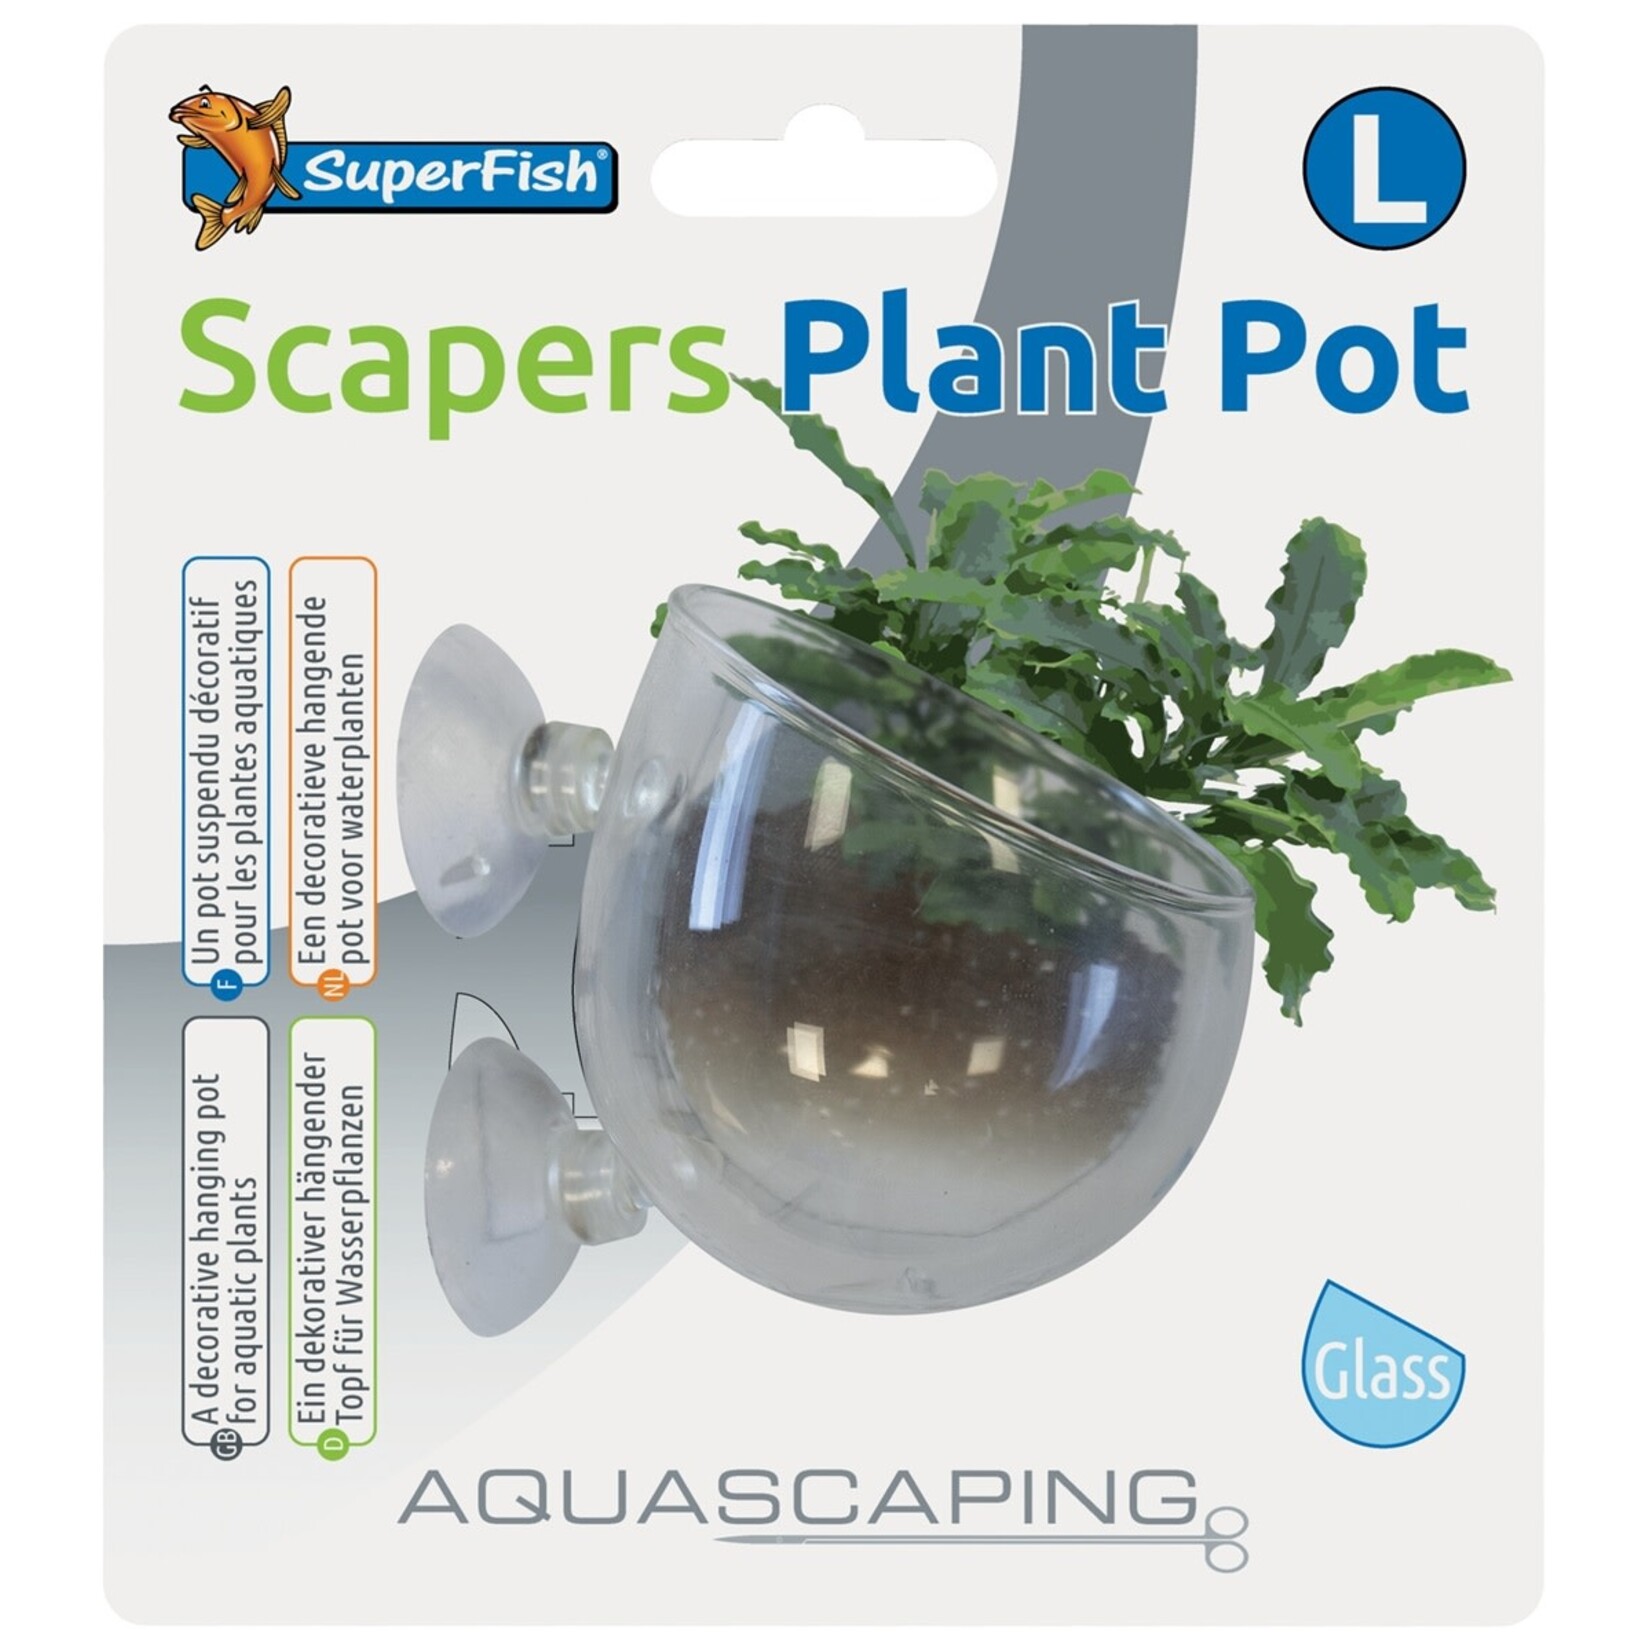 Scapers plant pot groot